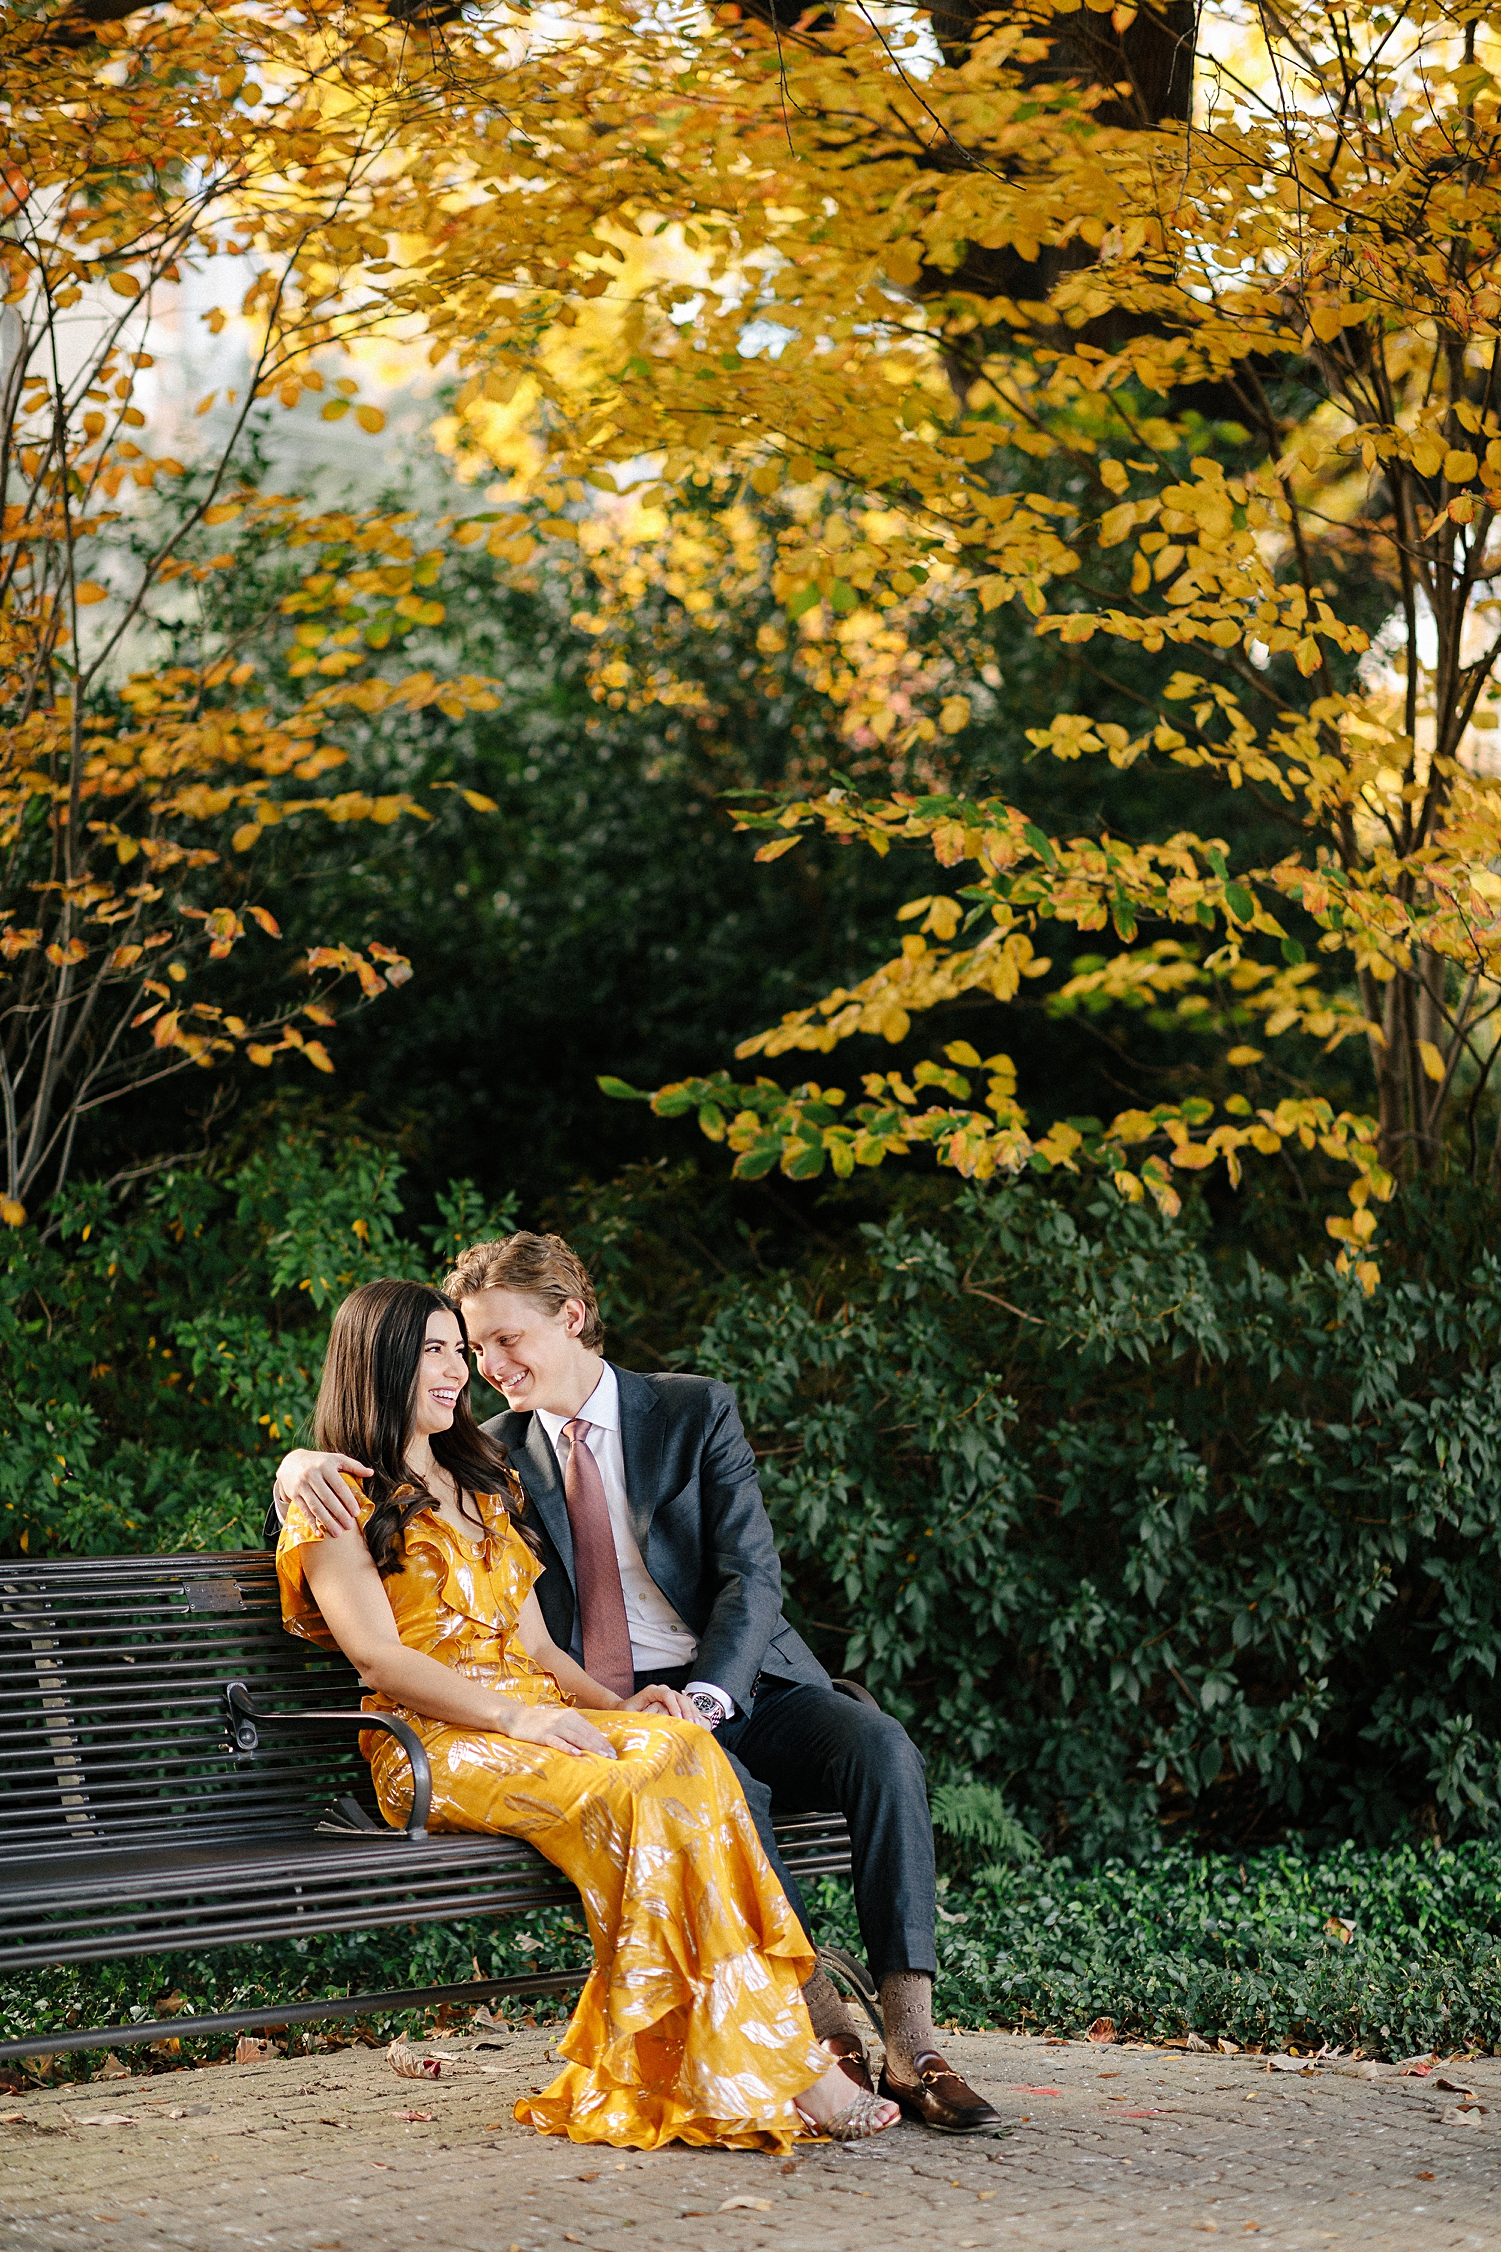 man in grey suit smiling with woman in yellow dress while sitting on park bench